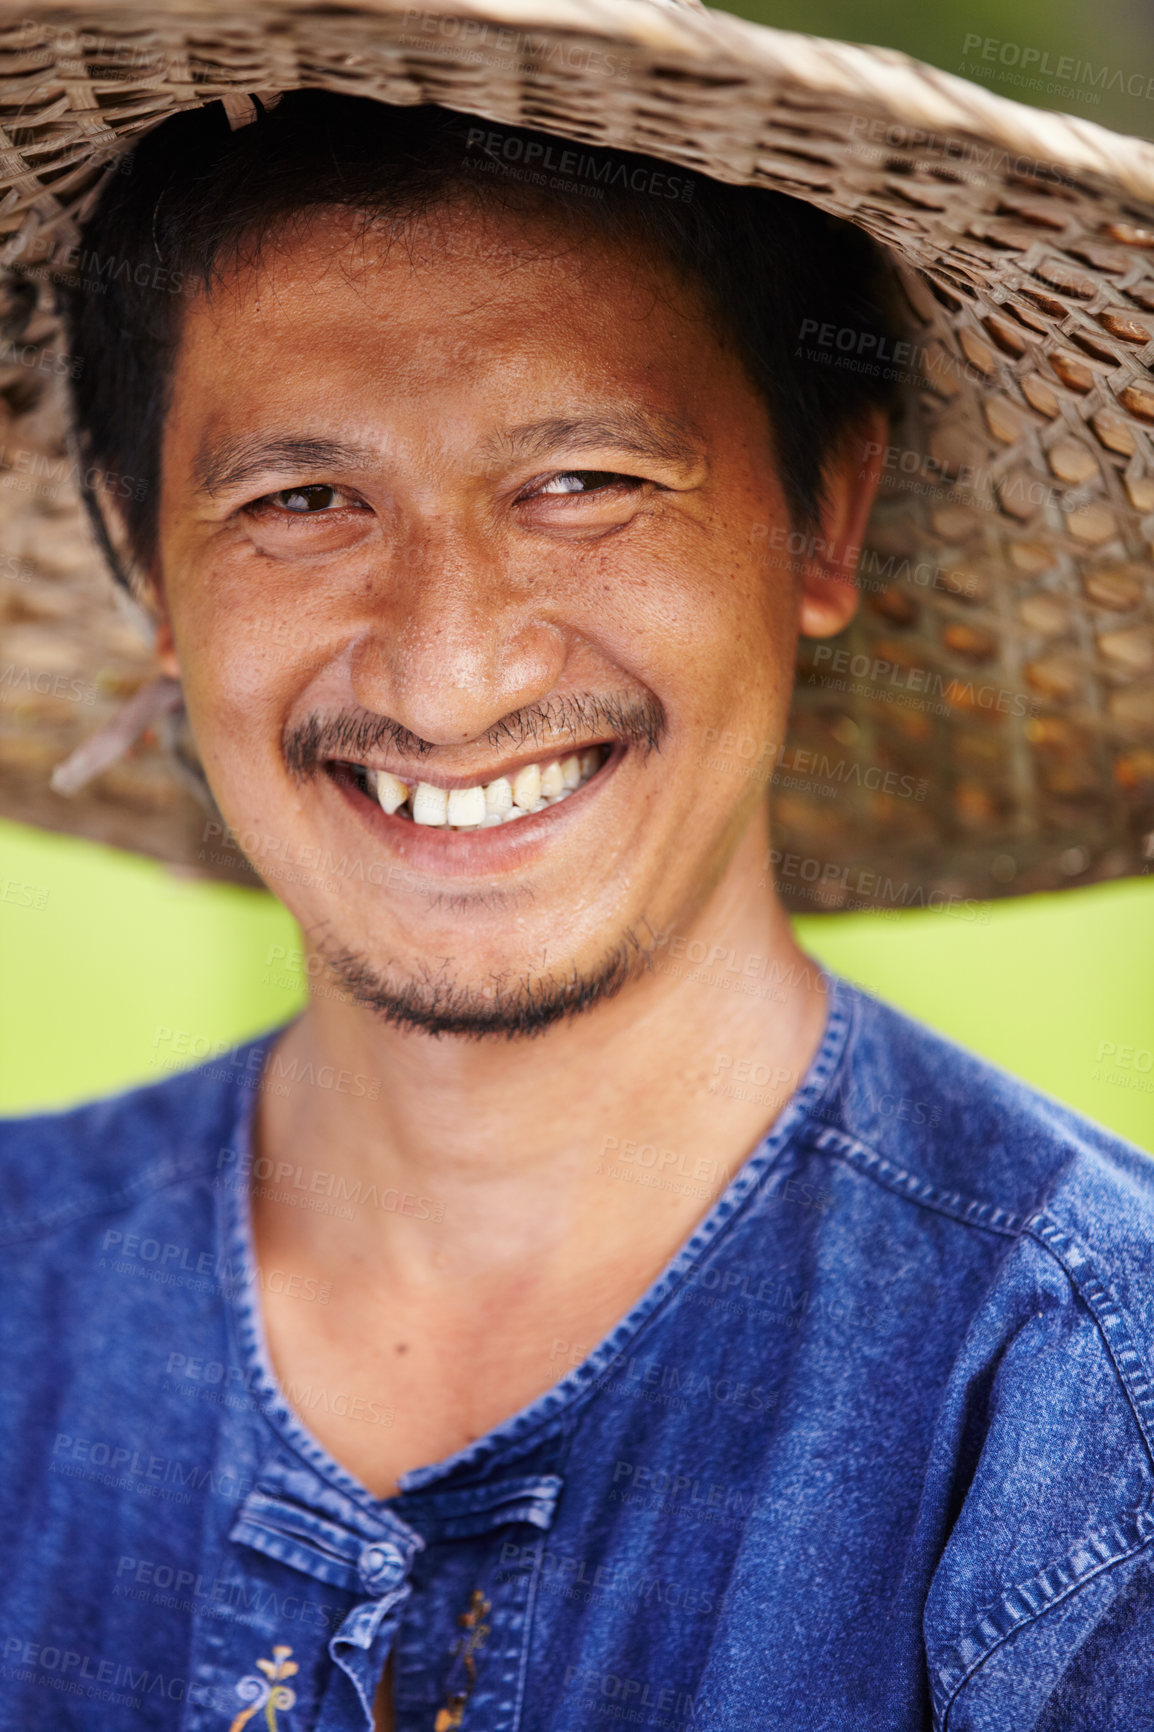 Buy stock photo Closeup portrait of a Thai rice paddy worker wearing a traditional hat